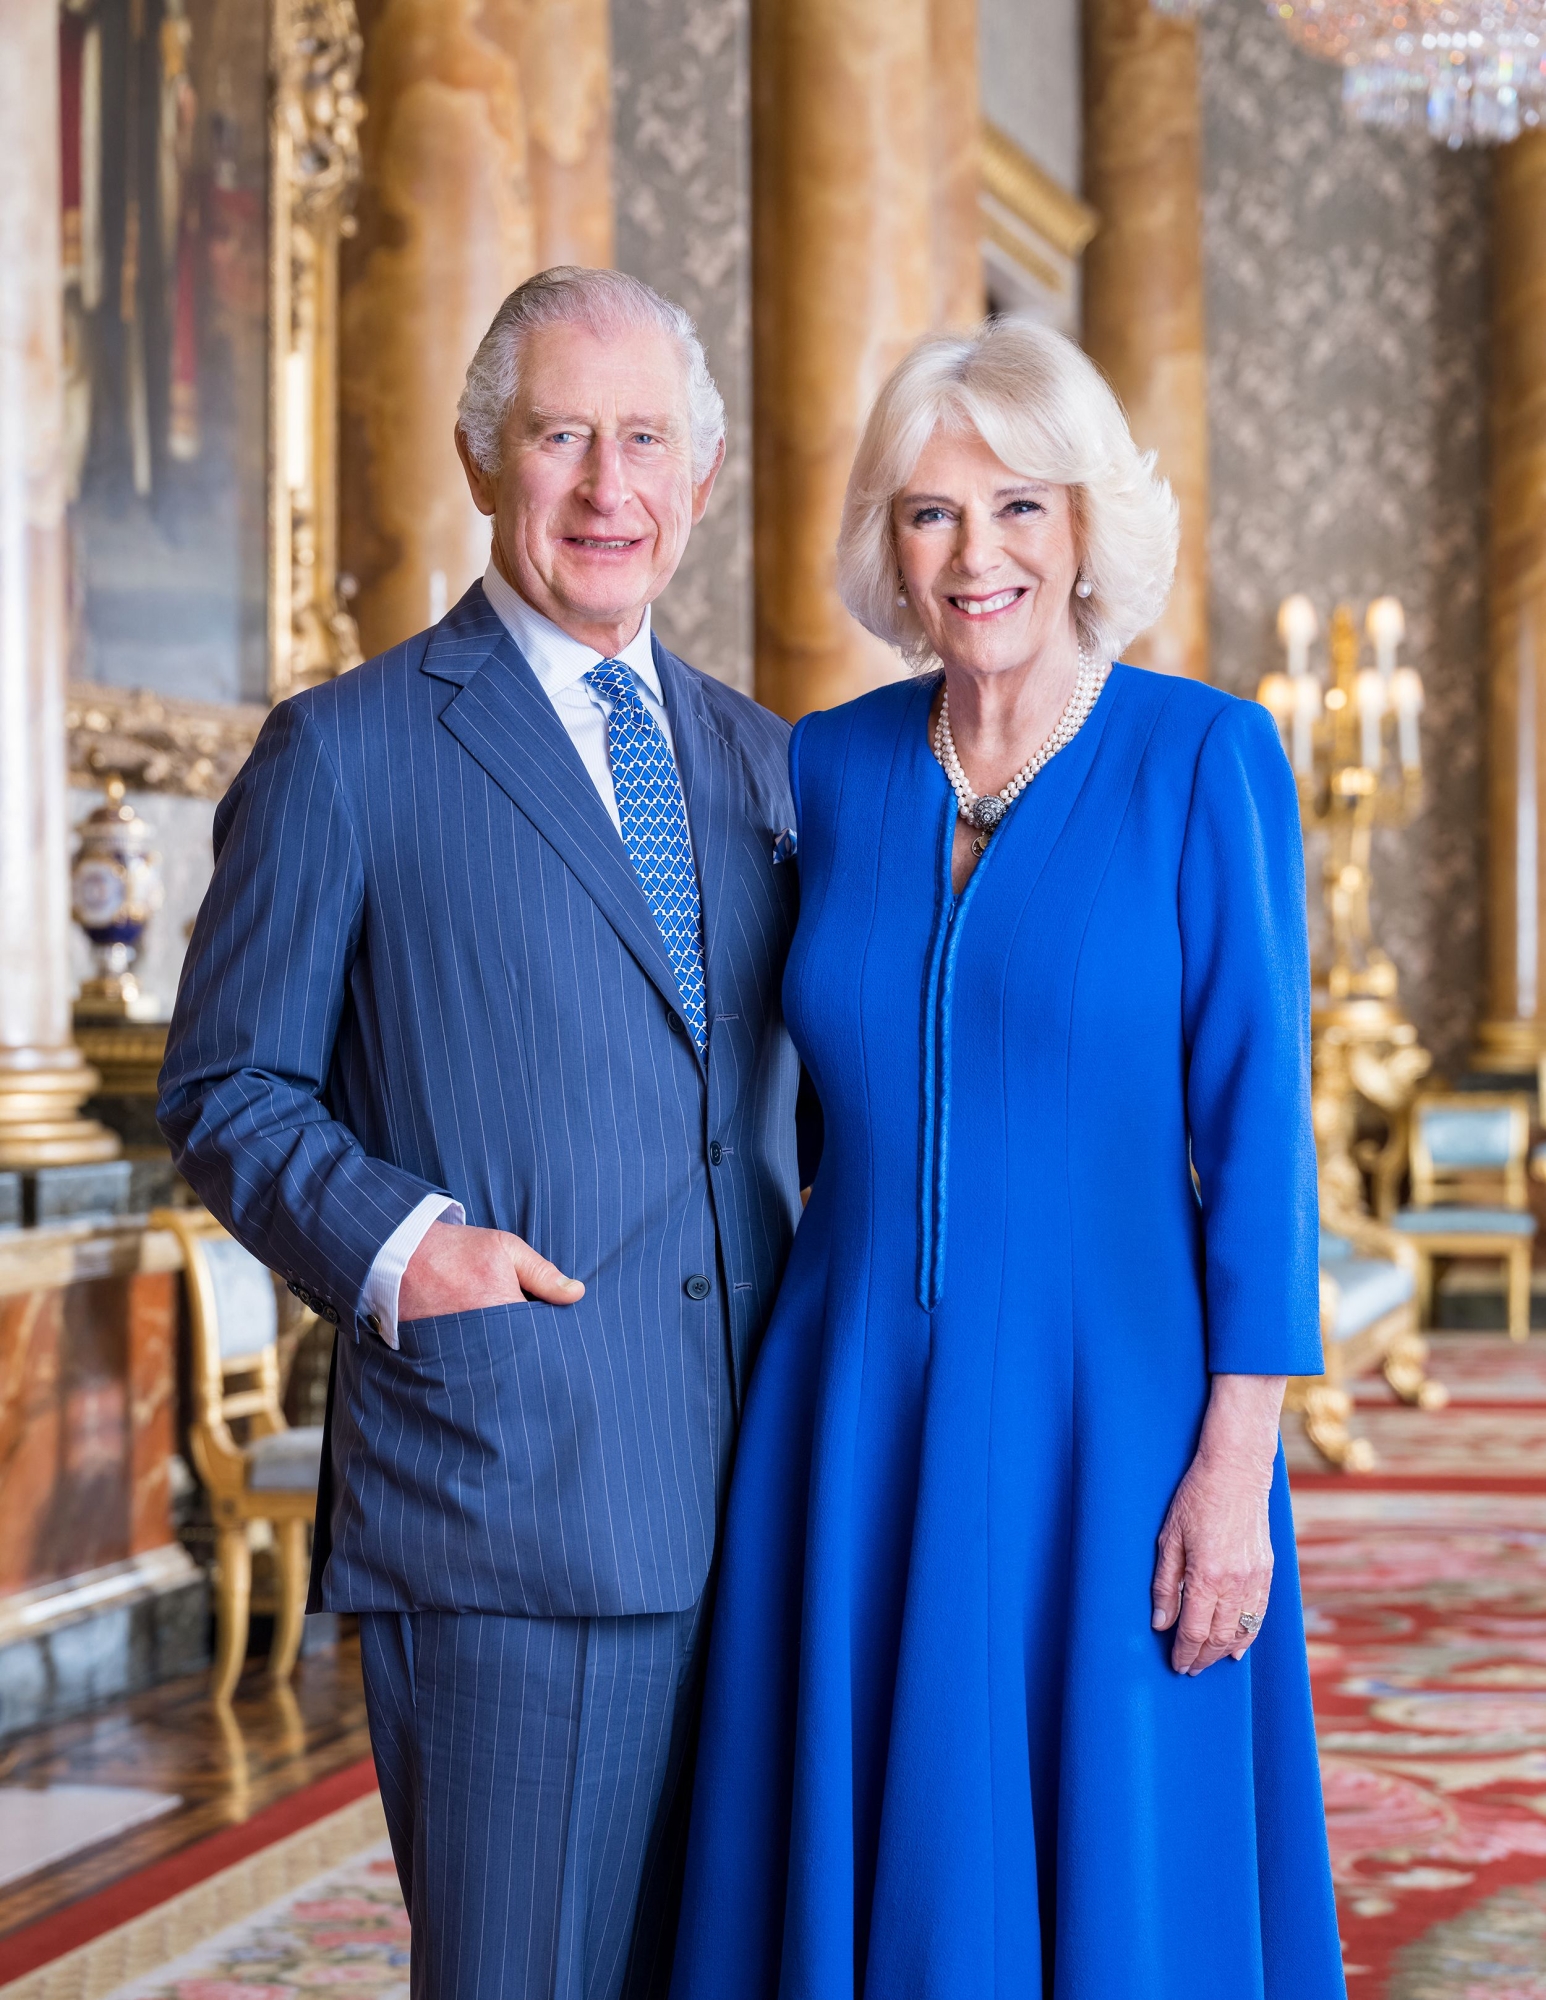 A handout photo taken on March 2023 and issued by Buckingham Palace on April 4, 2023 shows Britain's King Charles III and Britain's Camilla, Queen Consort posing in the Blue Drawing Room at Buckingham Palace, in London. - The portrait has been released to mark their Coronation on May 6, 2023. (Photo by Hugo BURNAND / BUCKINGHAM PALACE / AFP) / RESTRICTED TO EDITORIAL USE - MANDATORY CREDIT "AFP PHOTO / BUCKINGHAM PALACE / HUGO BURNAND " - NO MARKETING NO ADVERTISING CAMPAIGNS - DISTRIBUTED AS A SERVICE TO CLIENTS  This photograph can not be used after 0001 Tuesday May 9, 2023, without prior, written permission from Royal Communications. After that date, no further licensing can be made. Any questions relating to the use of the photographs should be first referred to Buckingham Palace before publication. The portrait should be used in the context of Their Majesties' Coronation.  The photograph is provided to you strictly on condition that you will make no charge for the supply, release or publication of it and that these conditions and restrictions will apply (and that you will pass these on) to any organisation to whom you supply it. There shall be no commercial use whatsoever of the photograph (including by way of example) any use in merchandising, advertising or any other non-news editorial use. The photograph must not be digitally enhanced, manipulated or modified in any manner or form. /